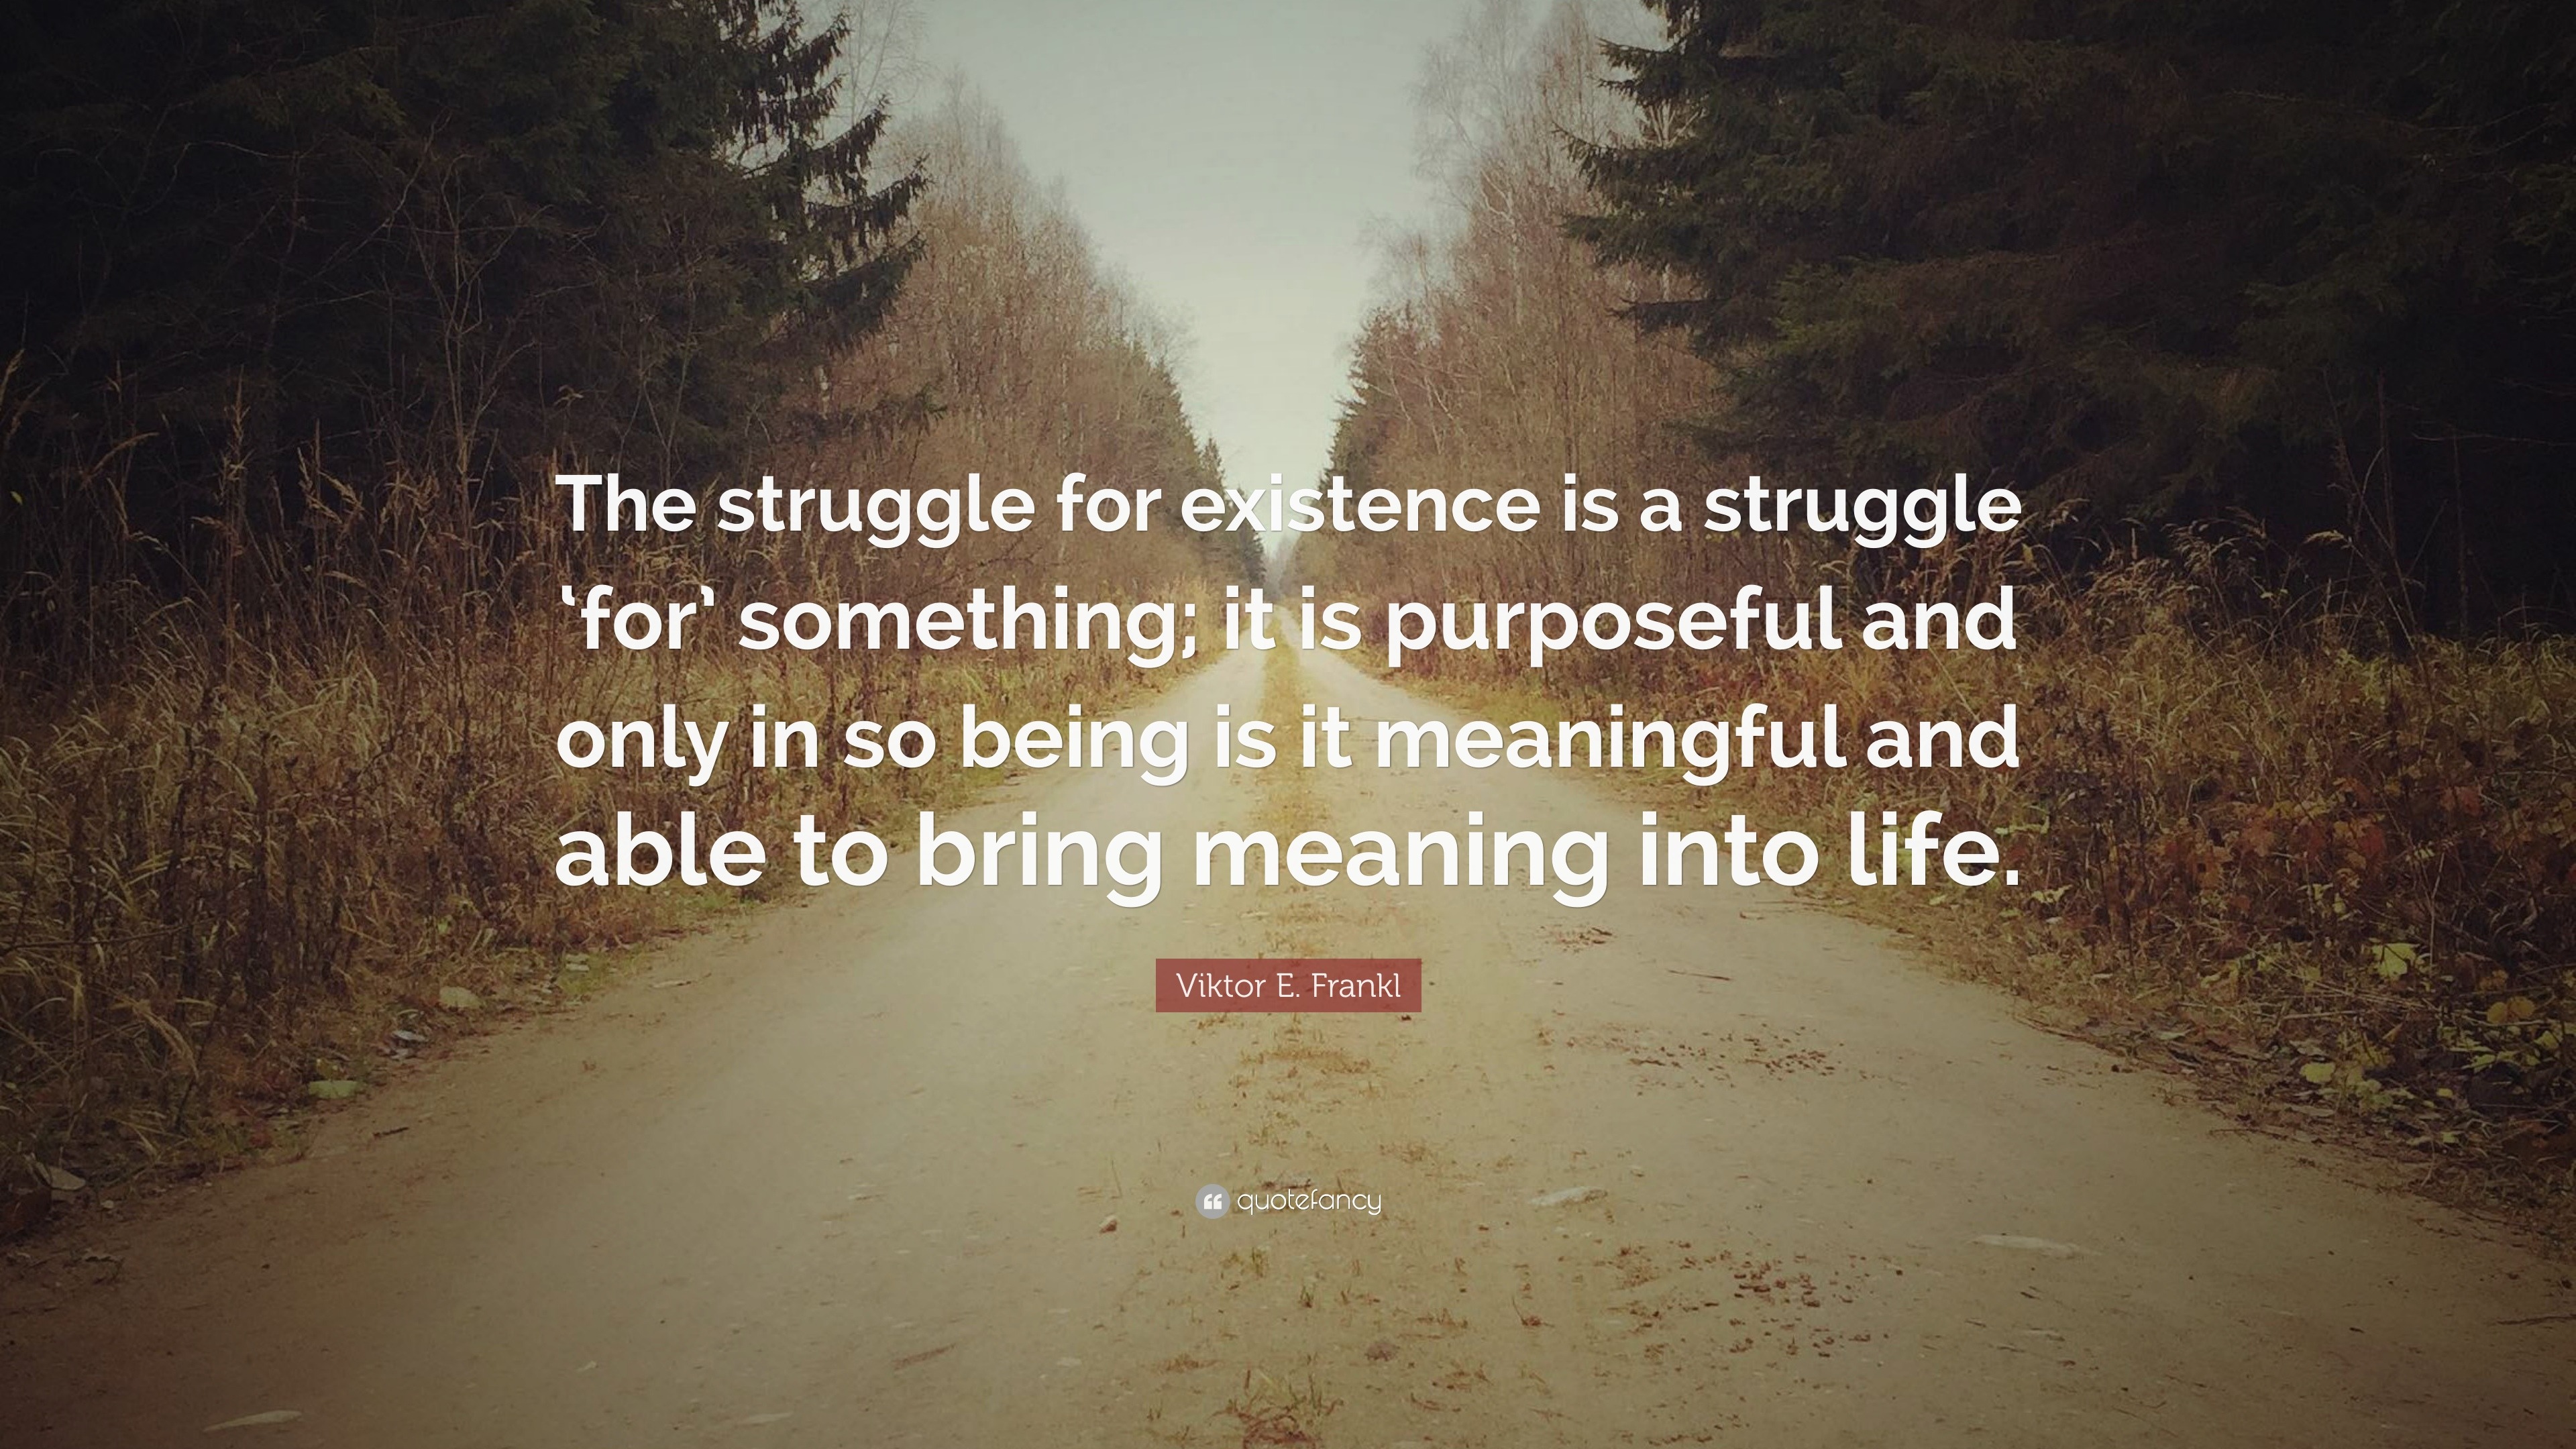 Viktor E. Frankl Quote: “The struggle for existence is a struggle ‘for ...